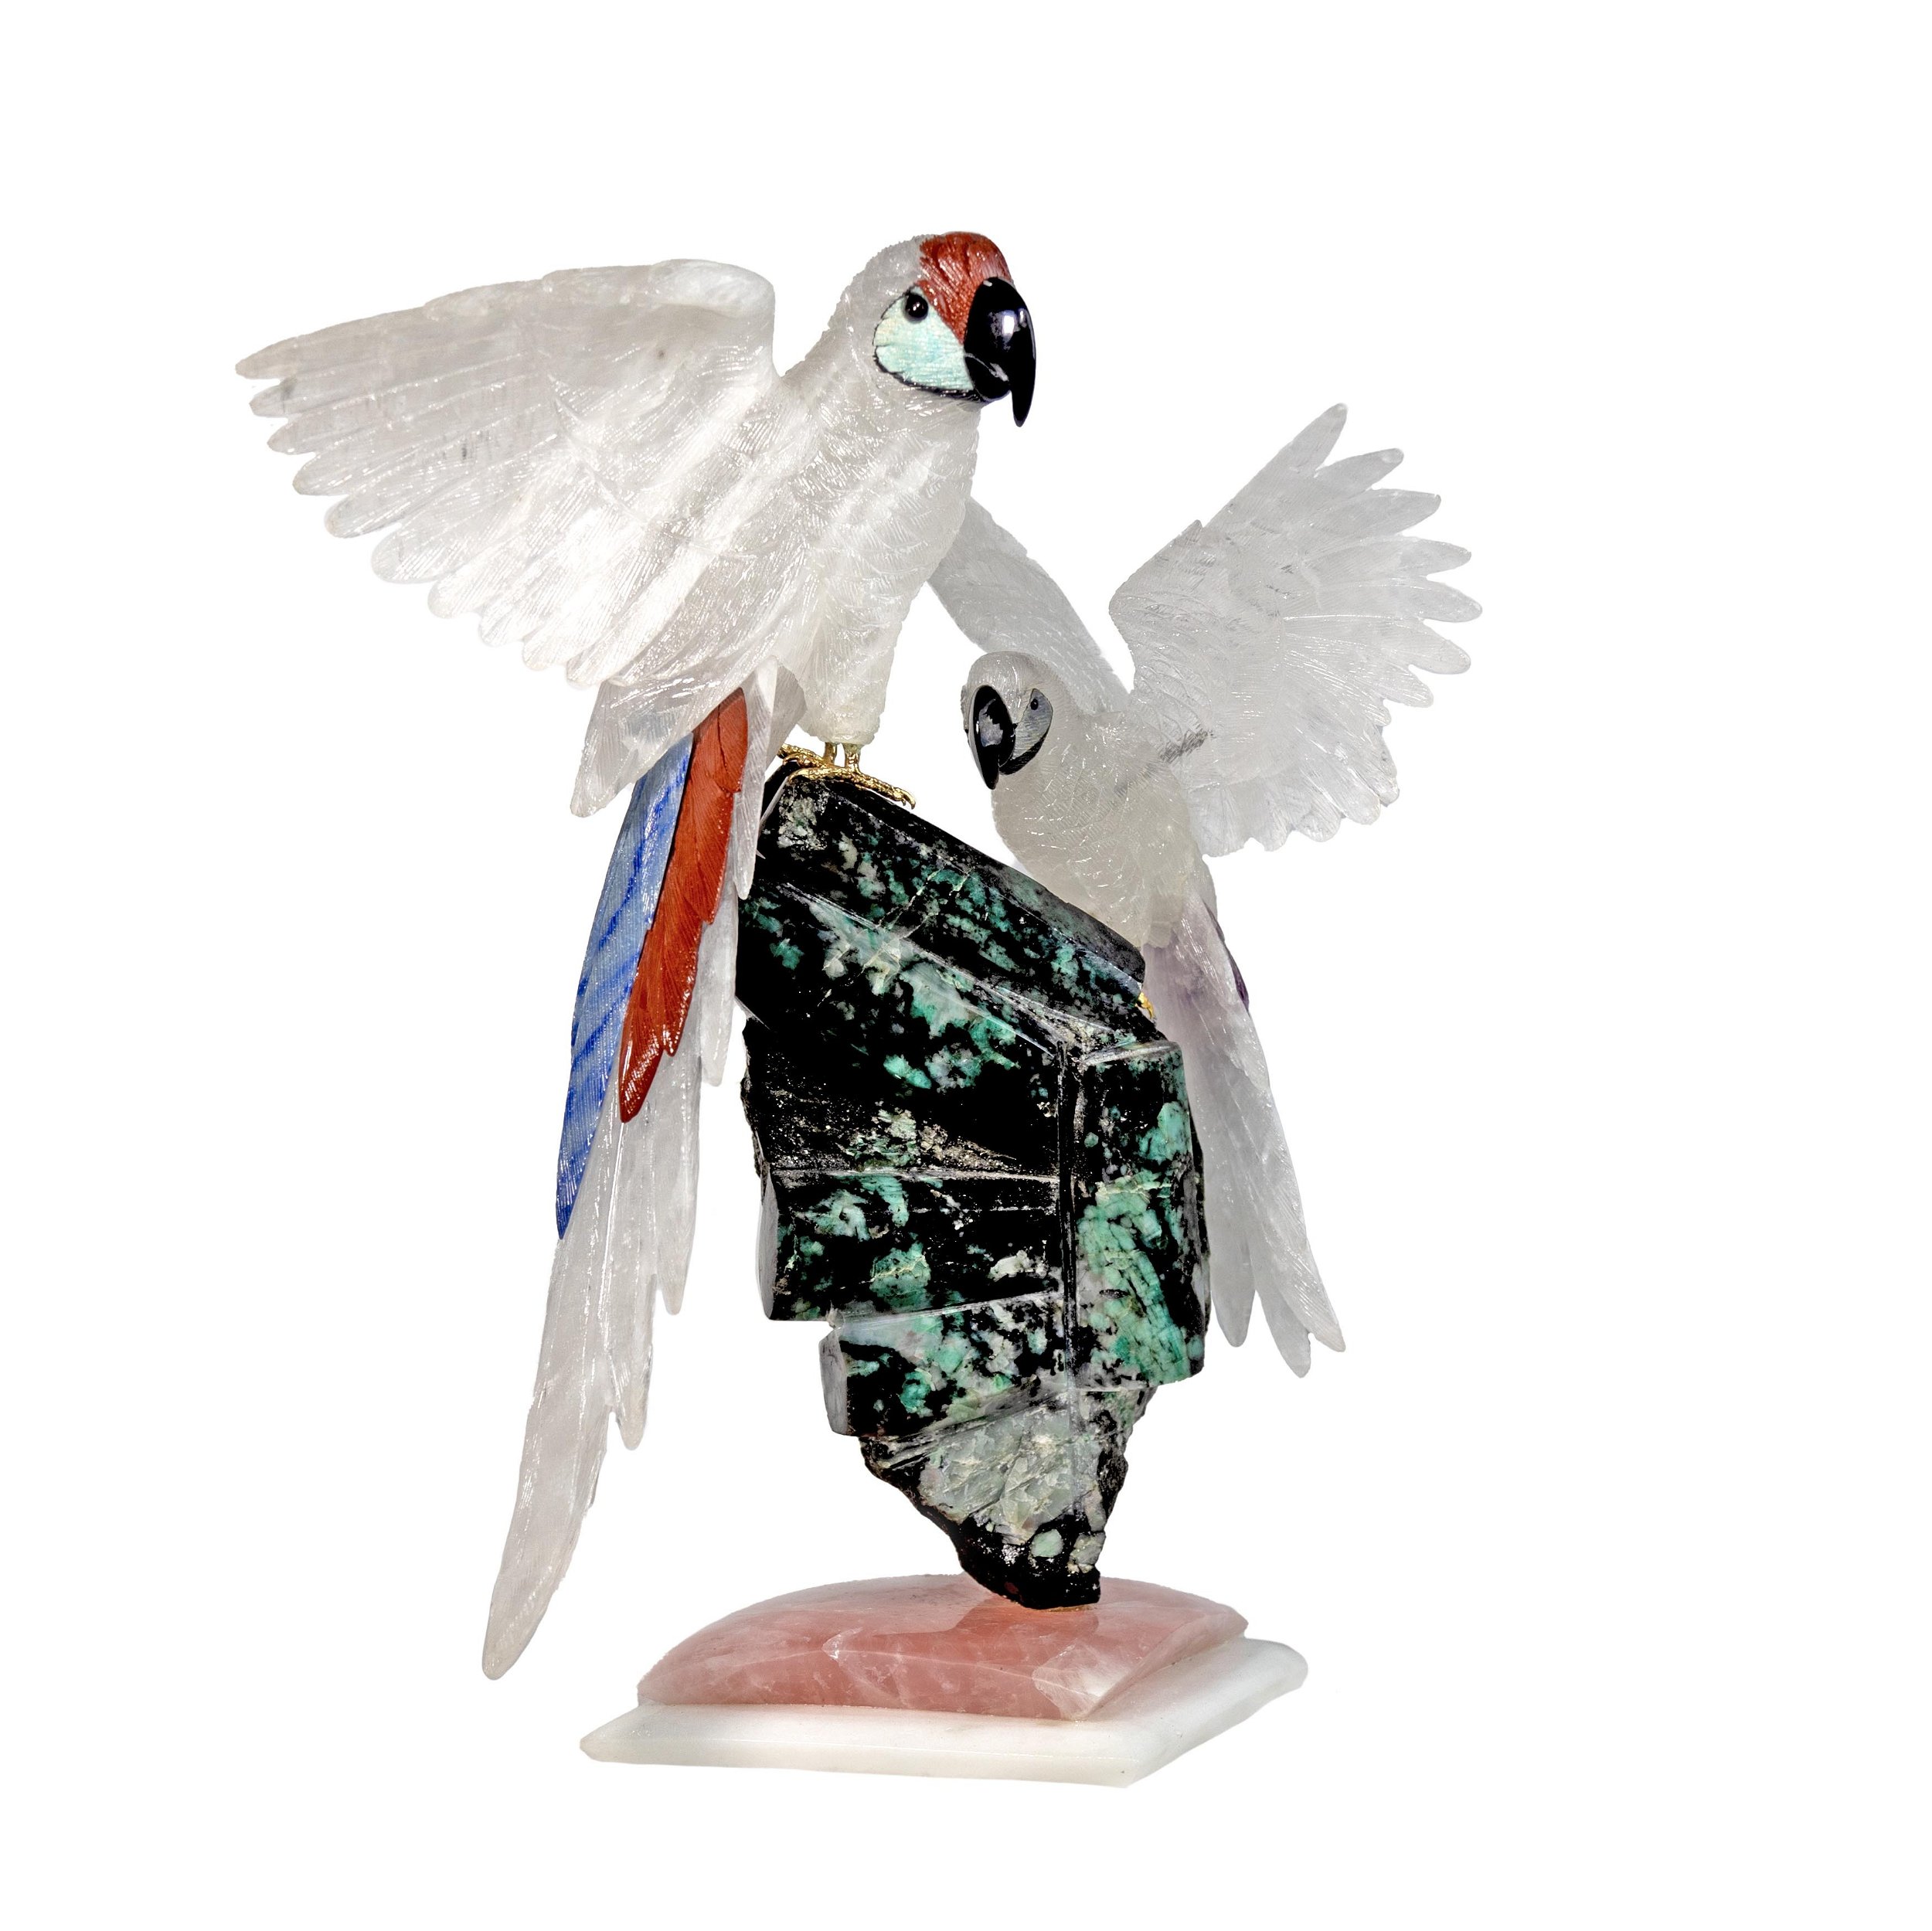 Crystal Quartz Macaw Pair With Spread Wings Another With Blue Calcite Tail Feathers Perched On Emerald Base With Rose Quartz